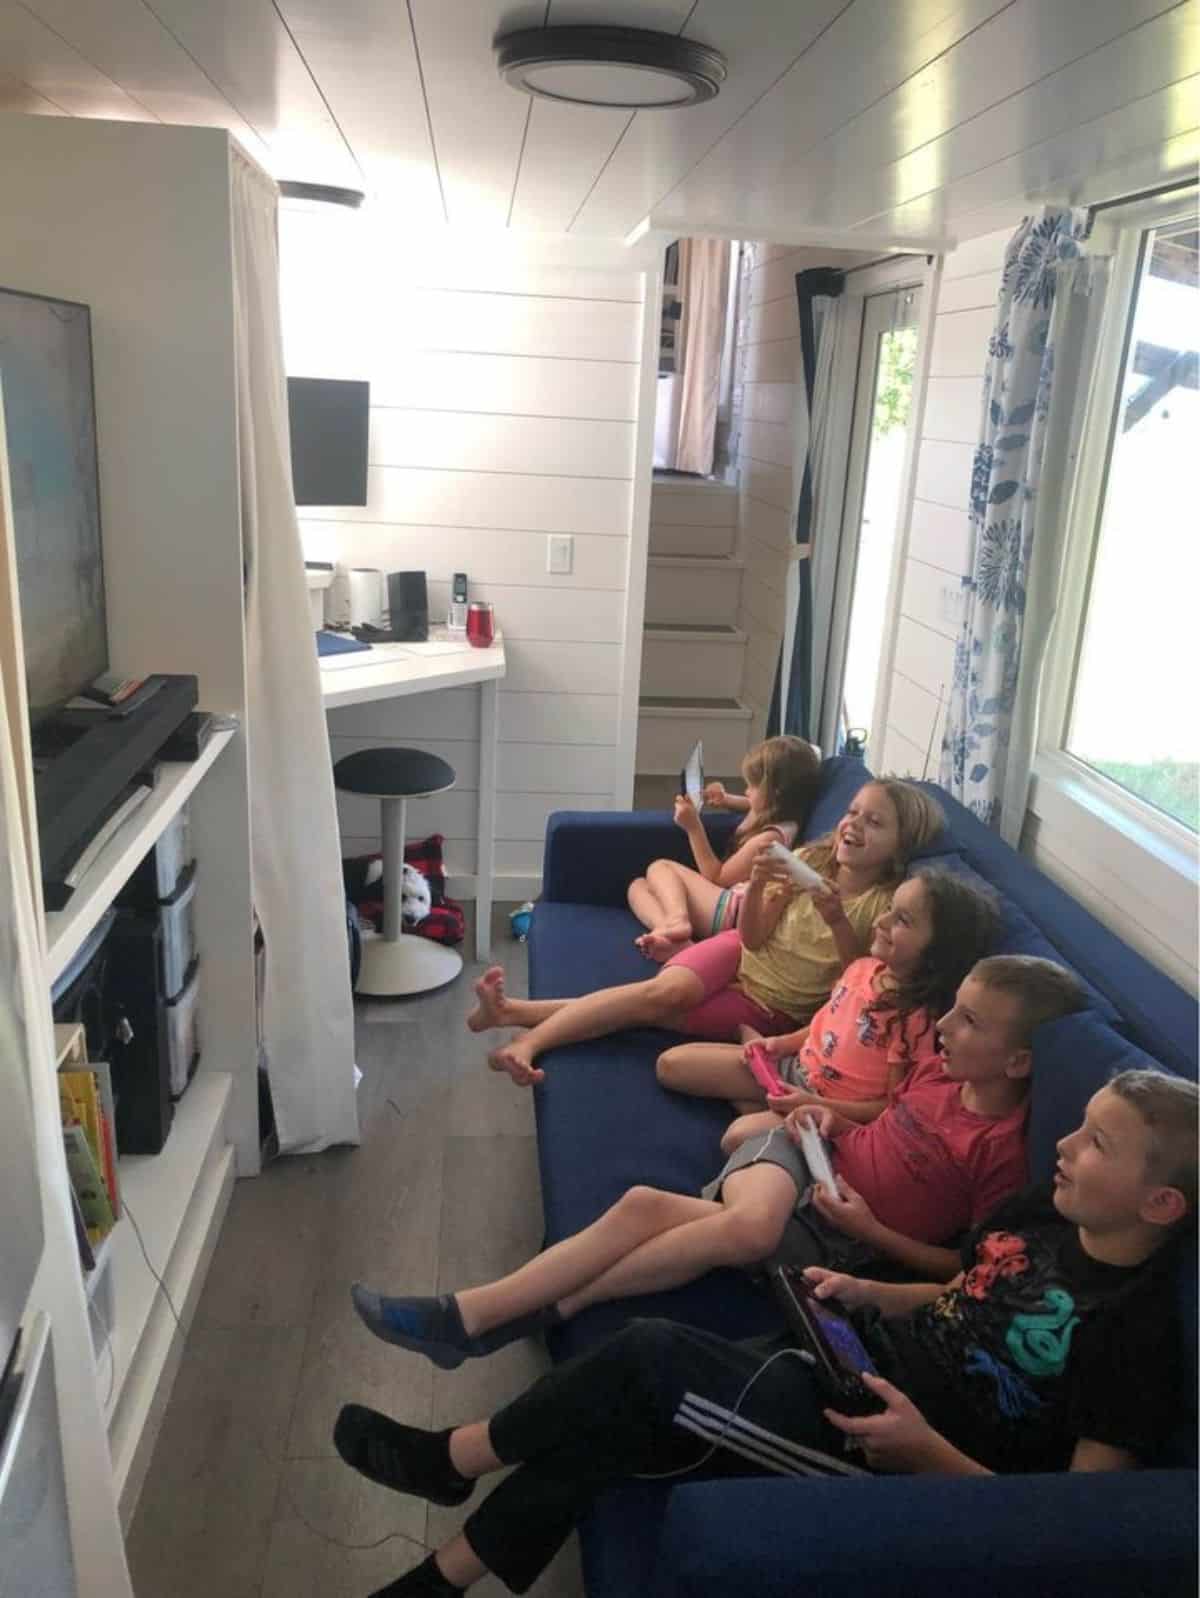 living area of tiny home for four has a comfortable couch, entertainment unit with TV